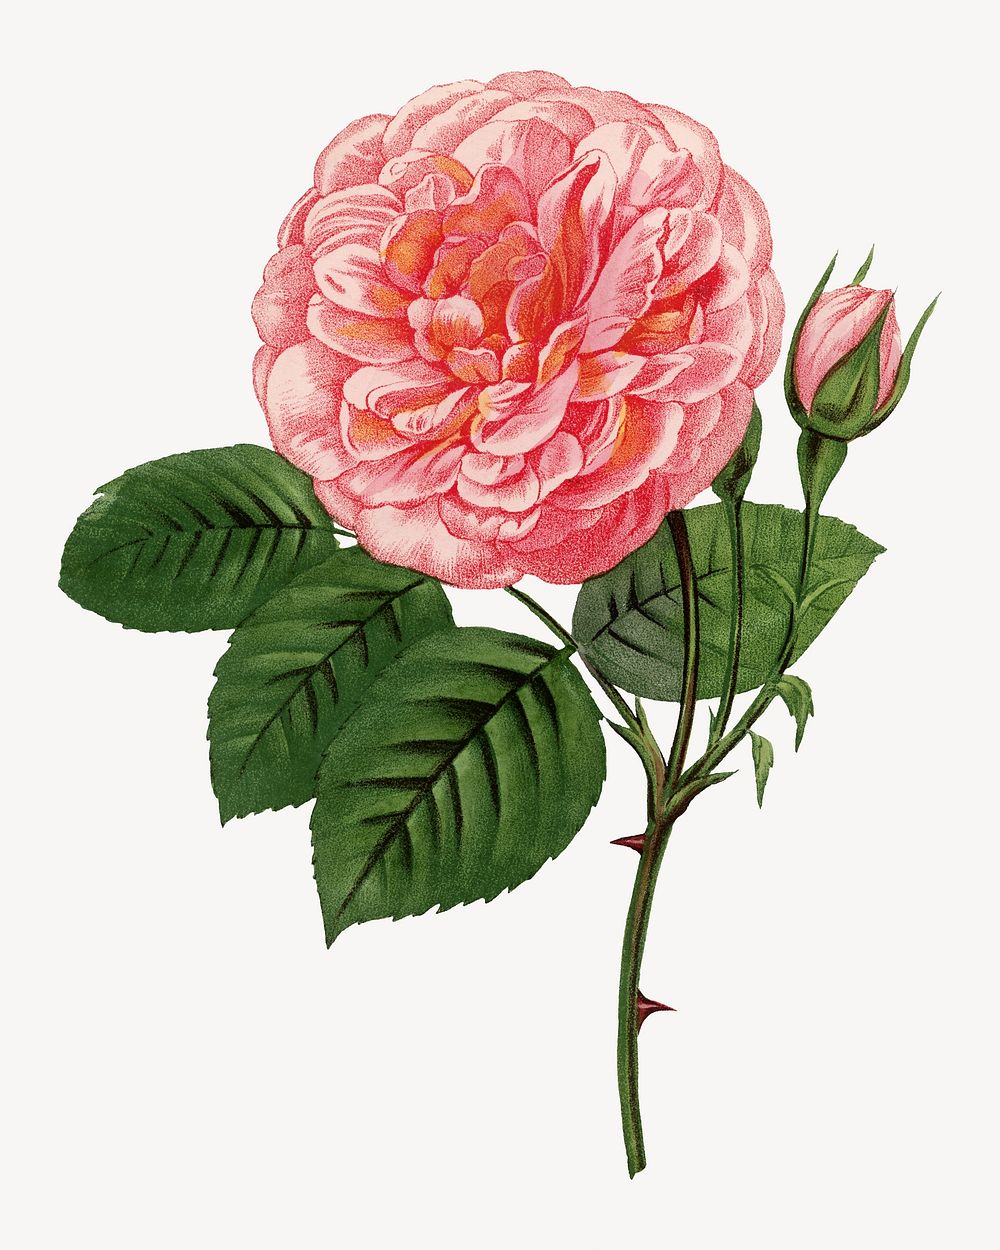 Pink rose, vintage French flower illustration by François-Frédéric Grobon. Remixed by rawpixel.